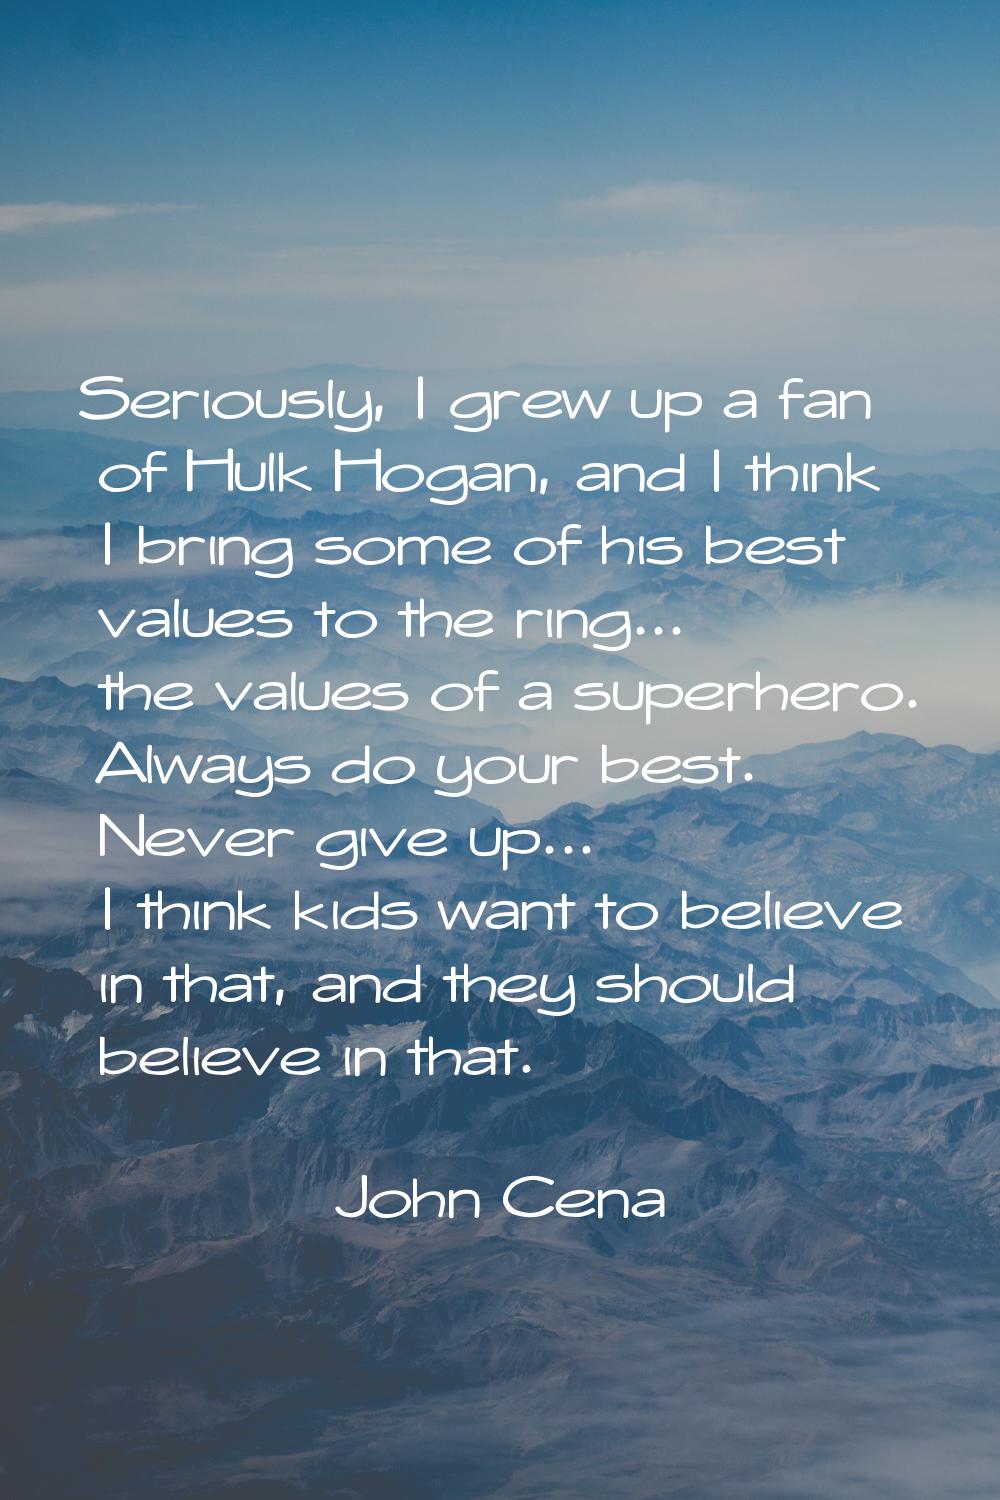 Seriously, I grew up a fan of Hulk Hogan, and I think I bring some of his best values to the ring..